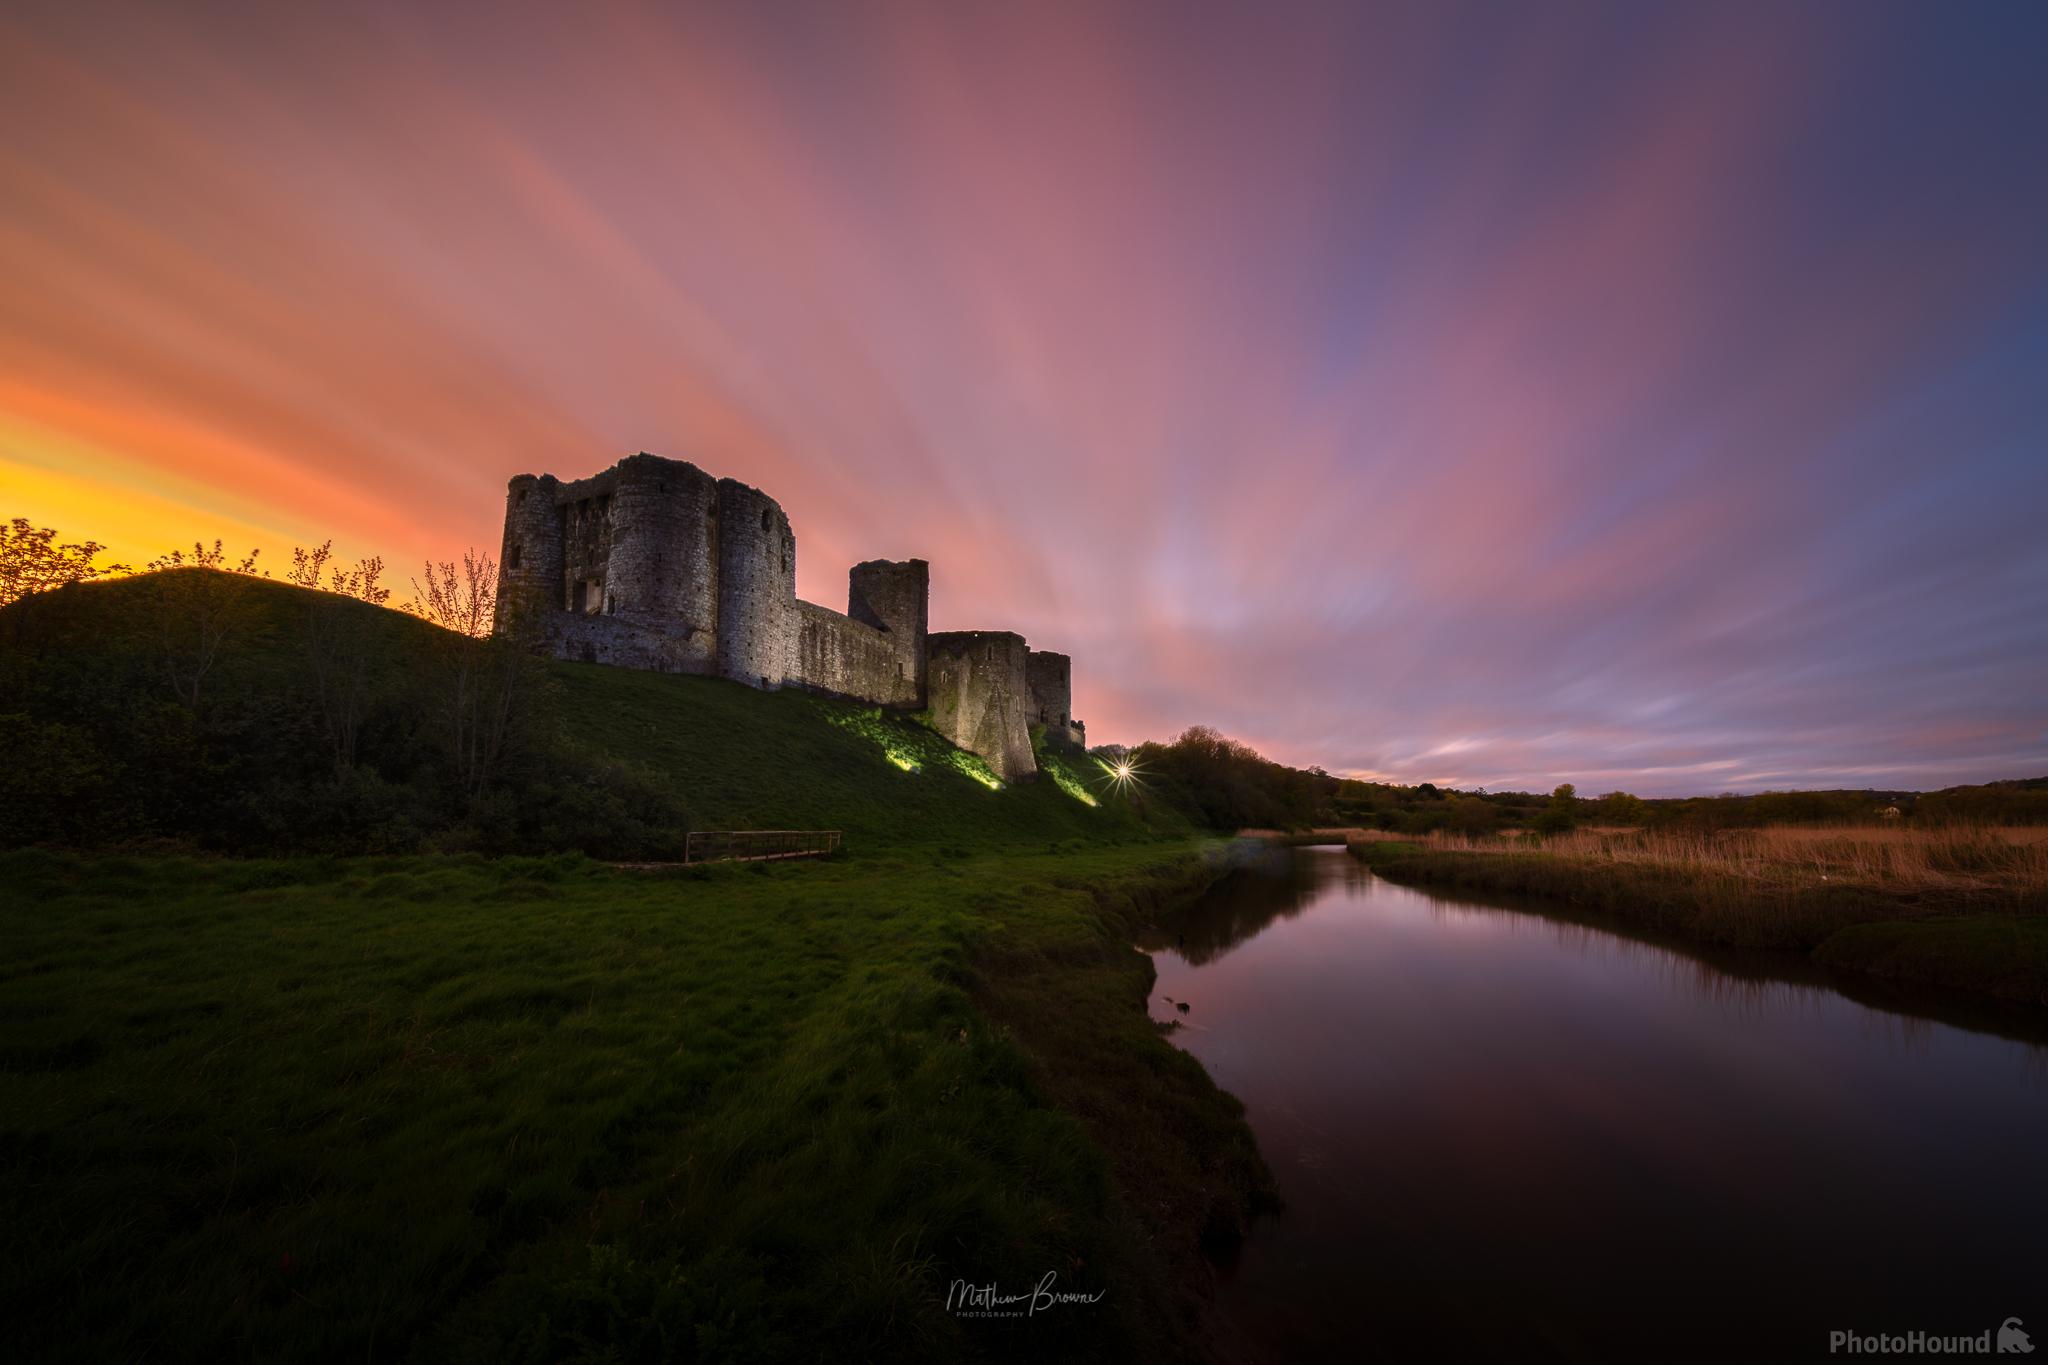 Image of Kidwelly Riverside View by Mathew Browne